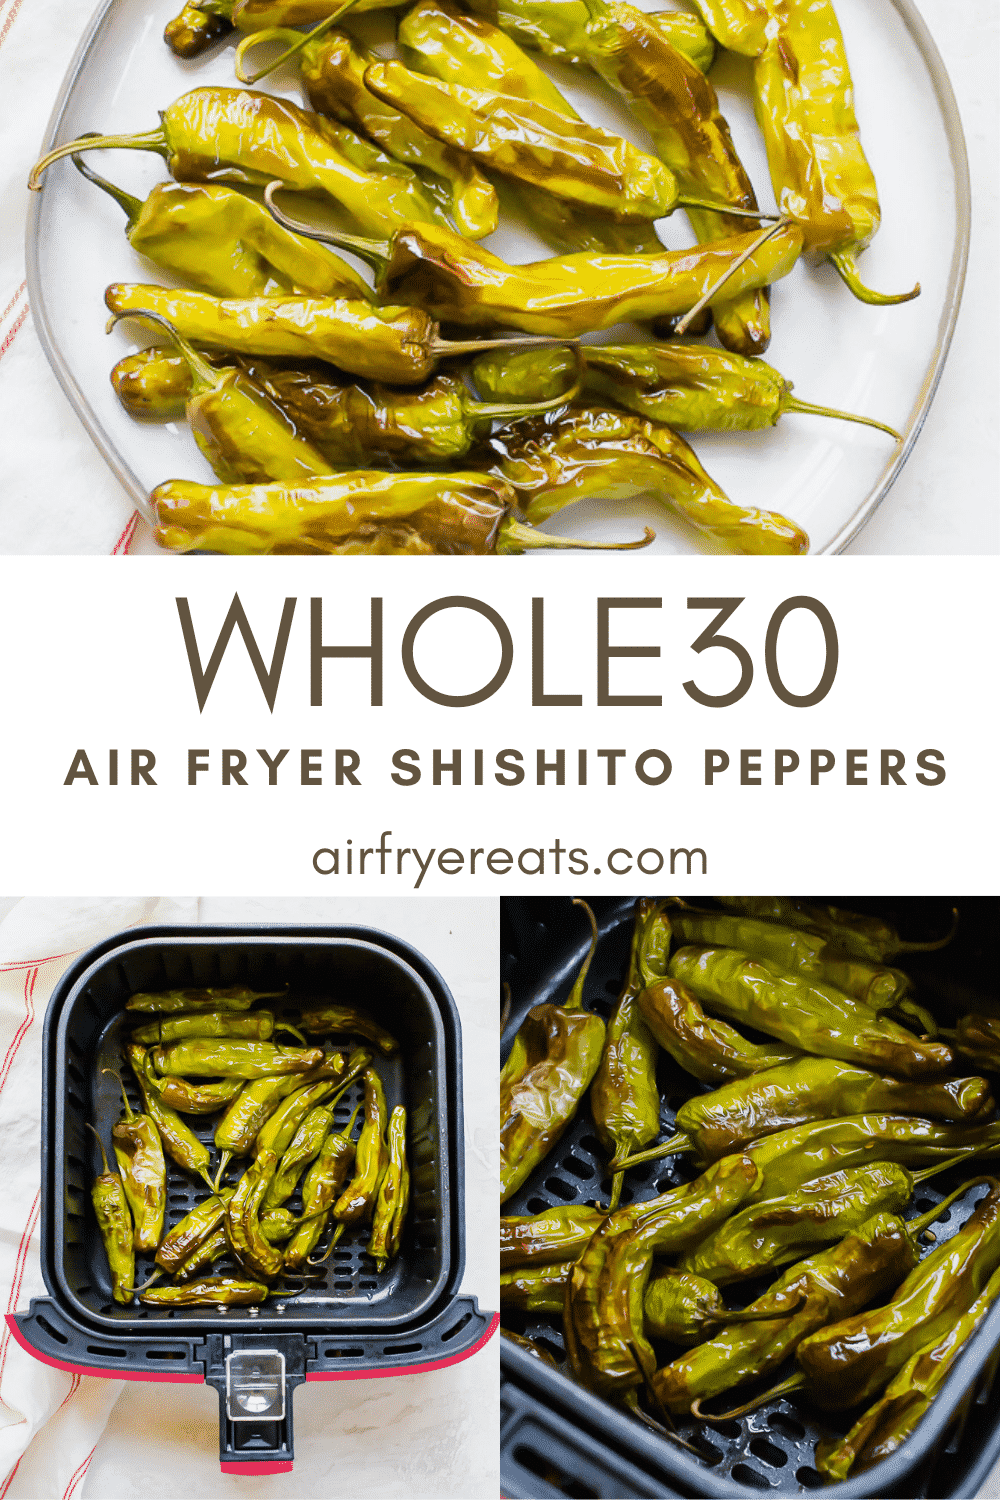 Air Fryer Shishito Peppers are a quick and delicious air fryer recipe. These blistered peppers are mild and make the perfect appetizer. You are going to fall in love with how easy this shishito pepper recipe is to make. #shishitopeppers #airfryerrecipes #airfryerpeppers via @vegetarianmamma